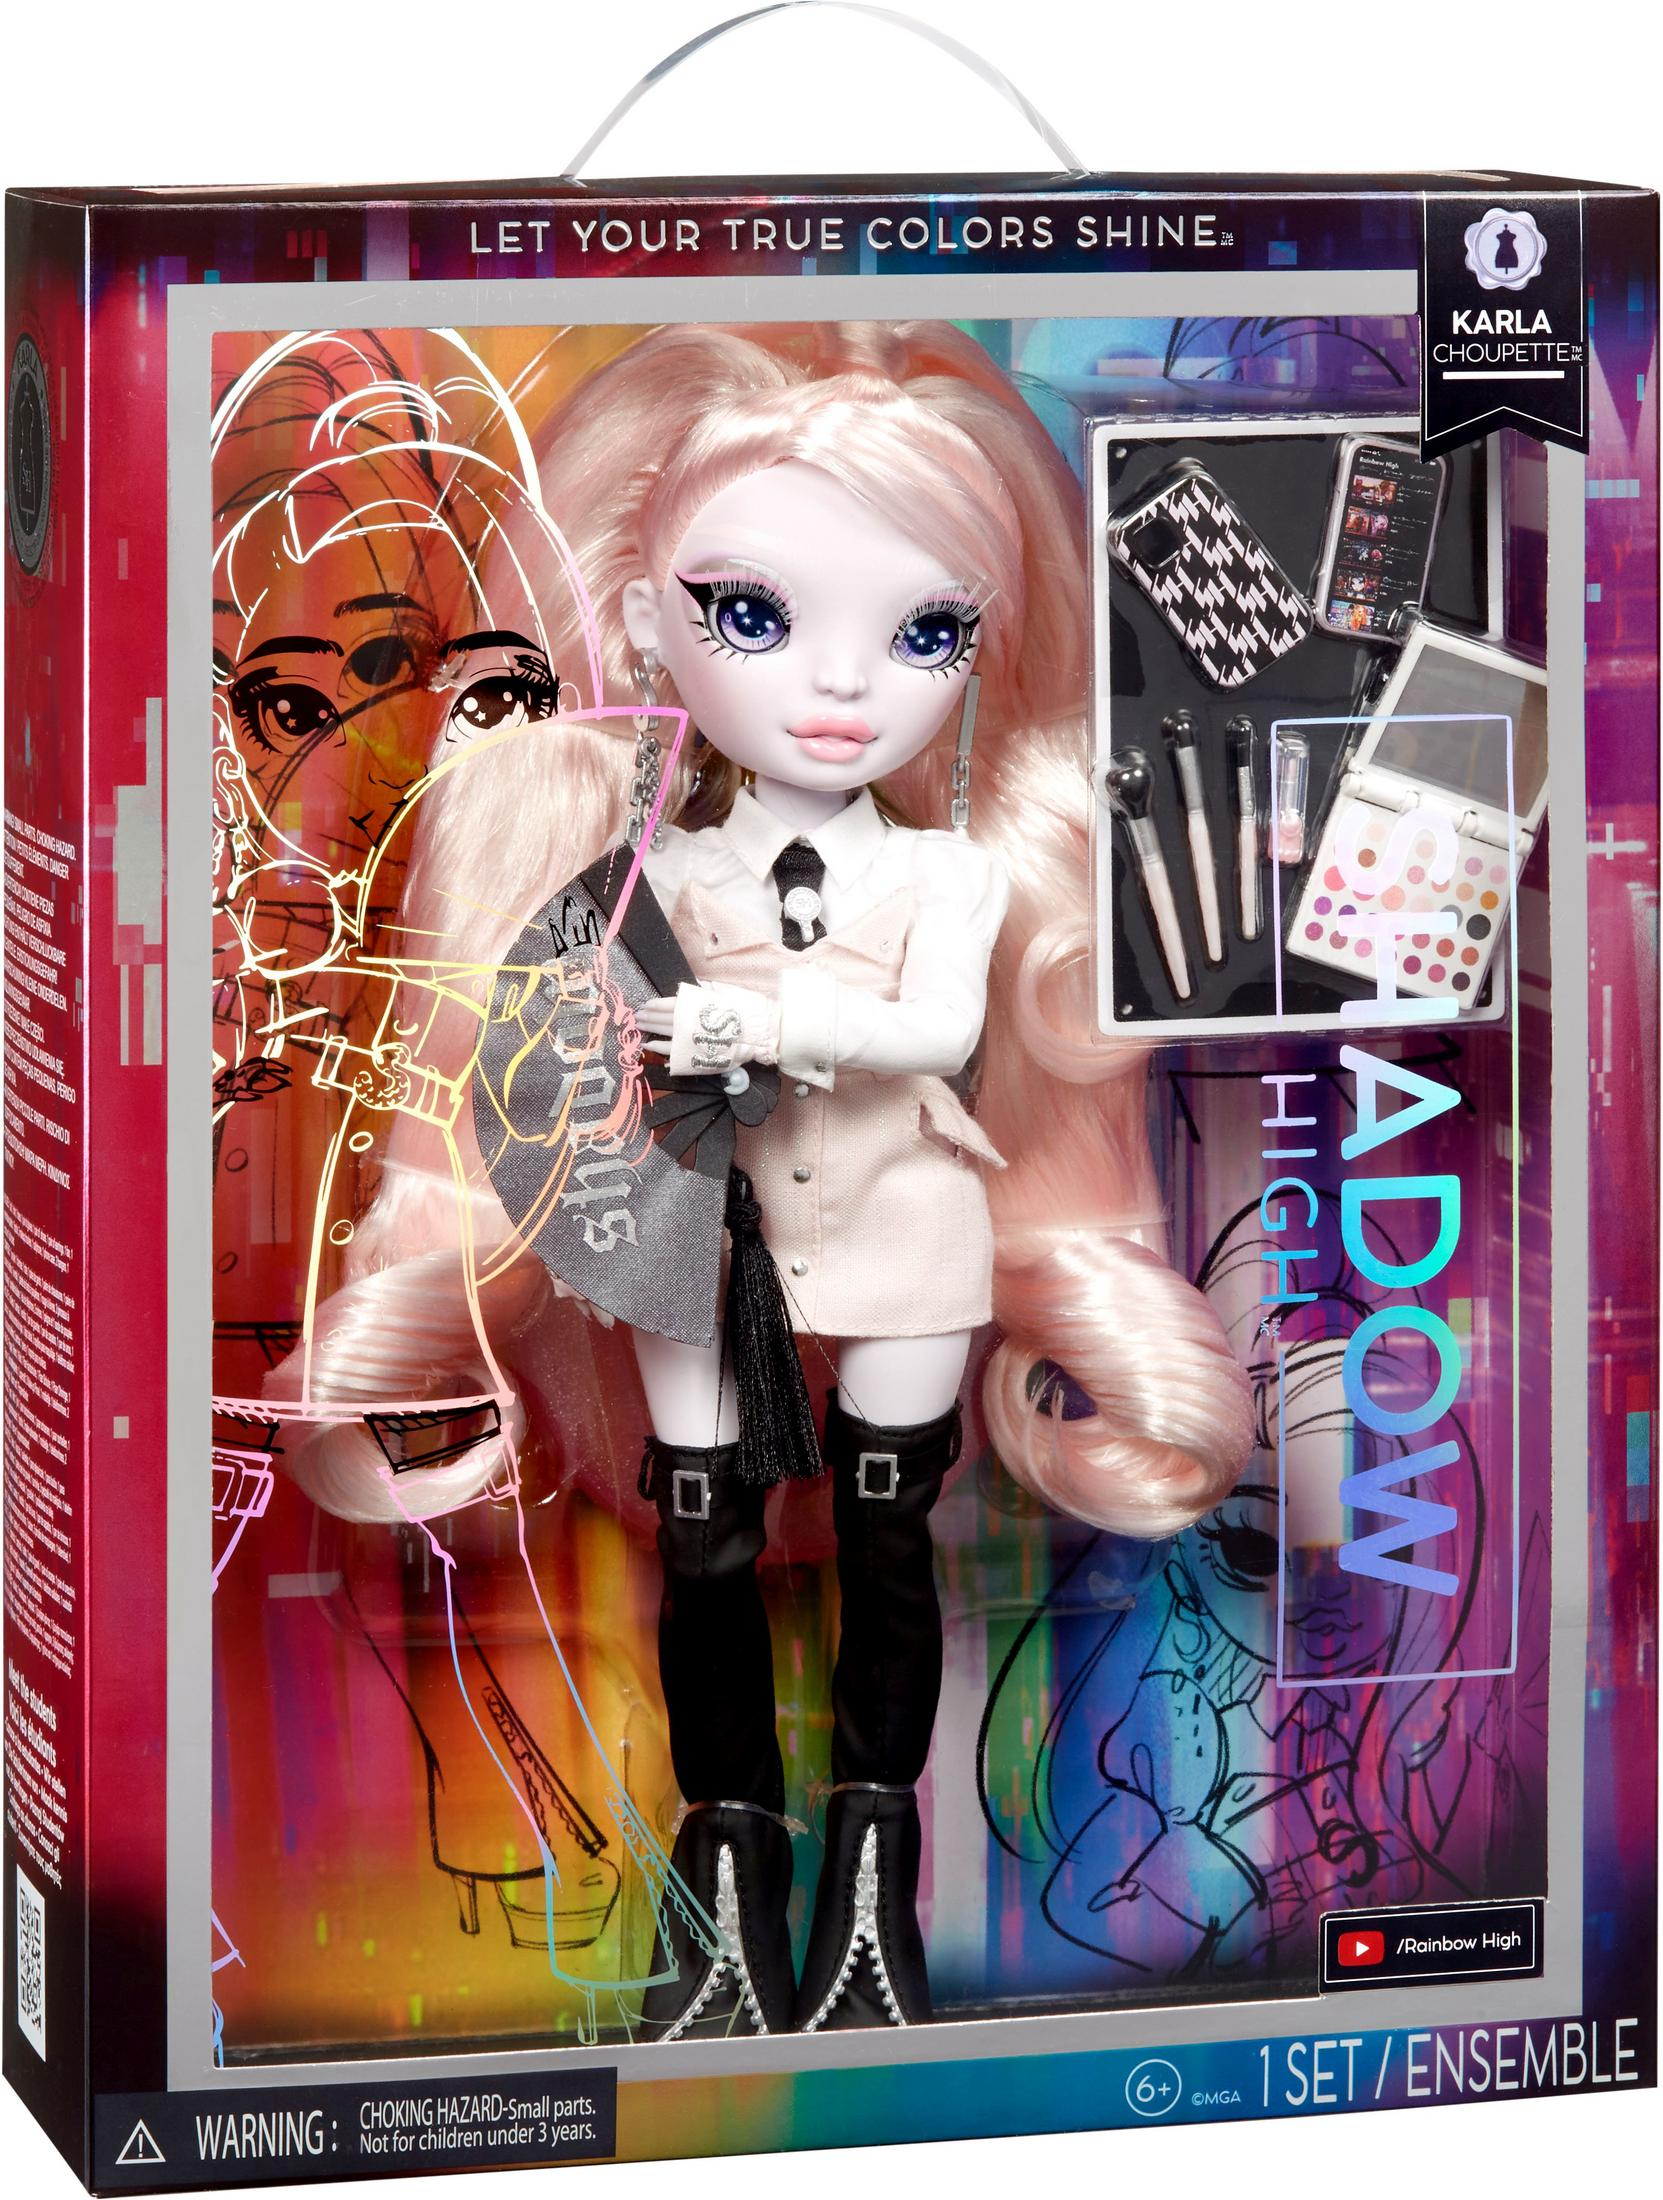 DOLL-IP FASHION 8X26.5G HIGH MGA CARAMEL Rosa (PINK) 583042 Spielzeugpuppe ENTERTAINMENT